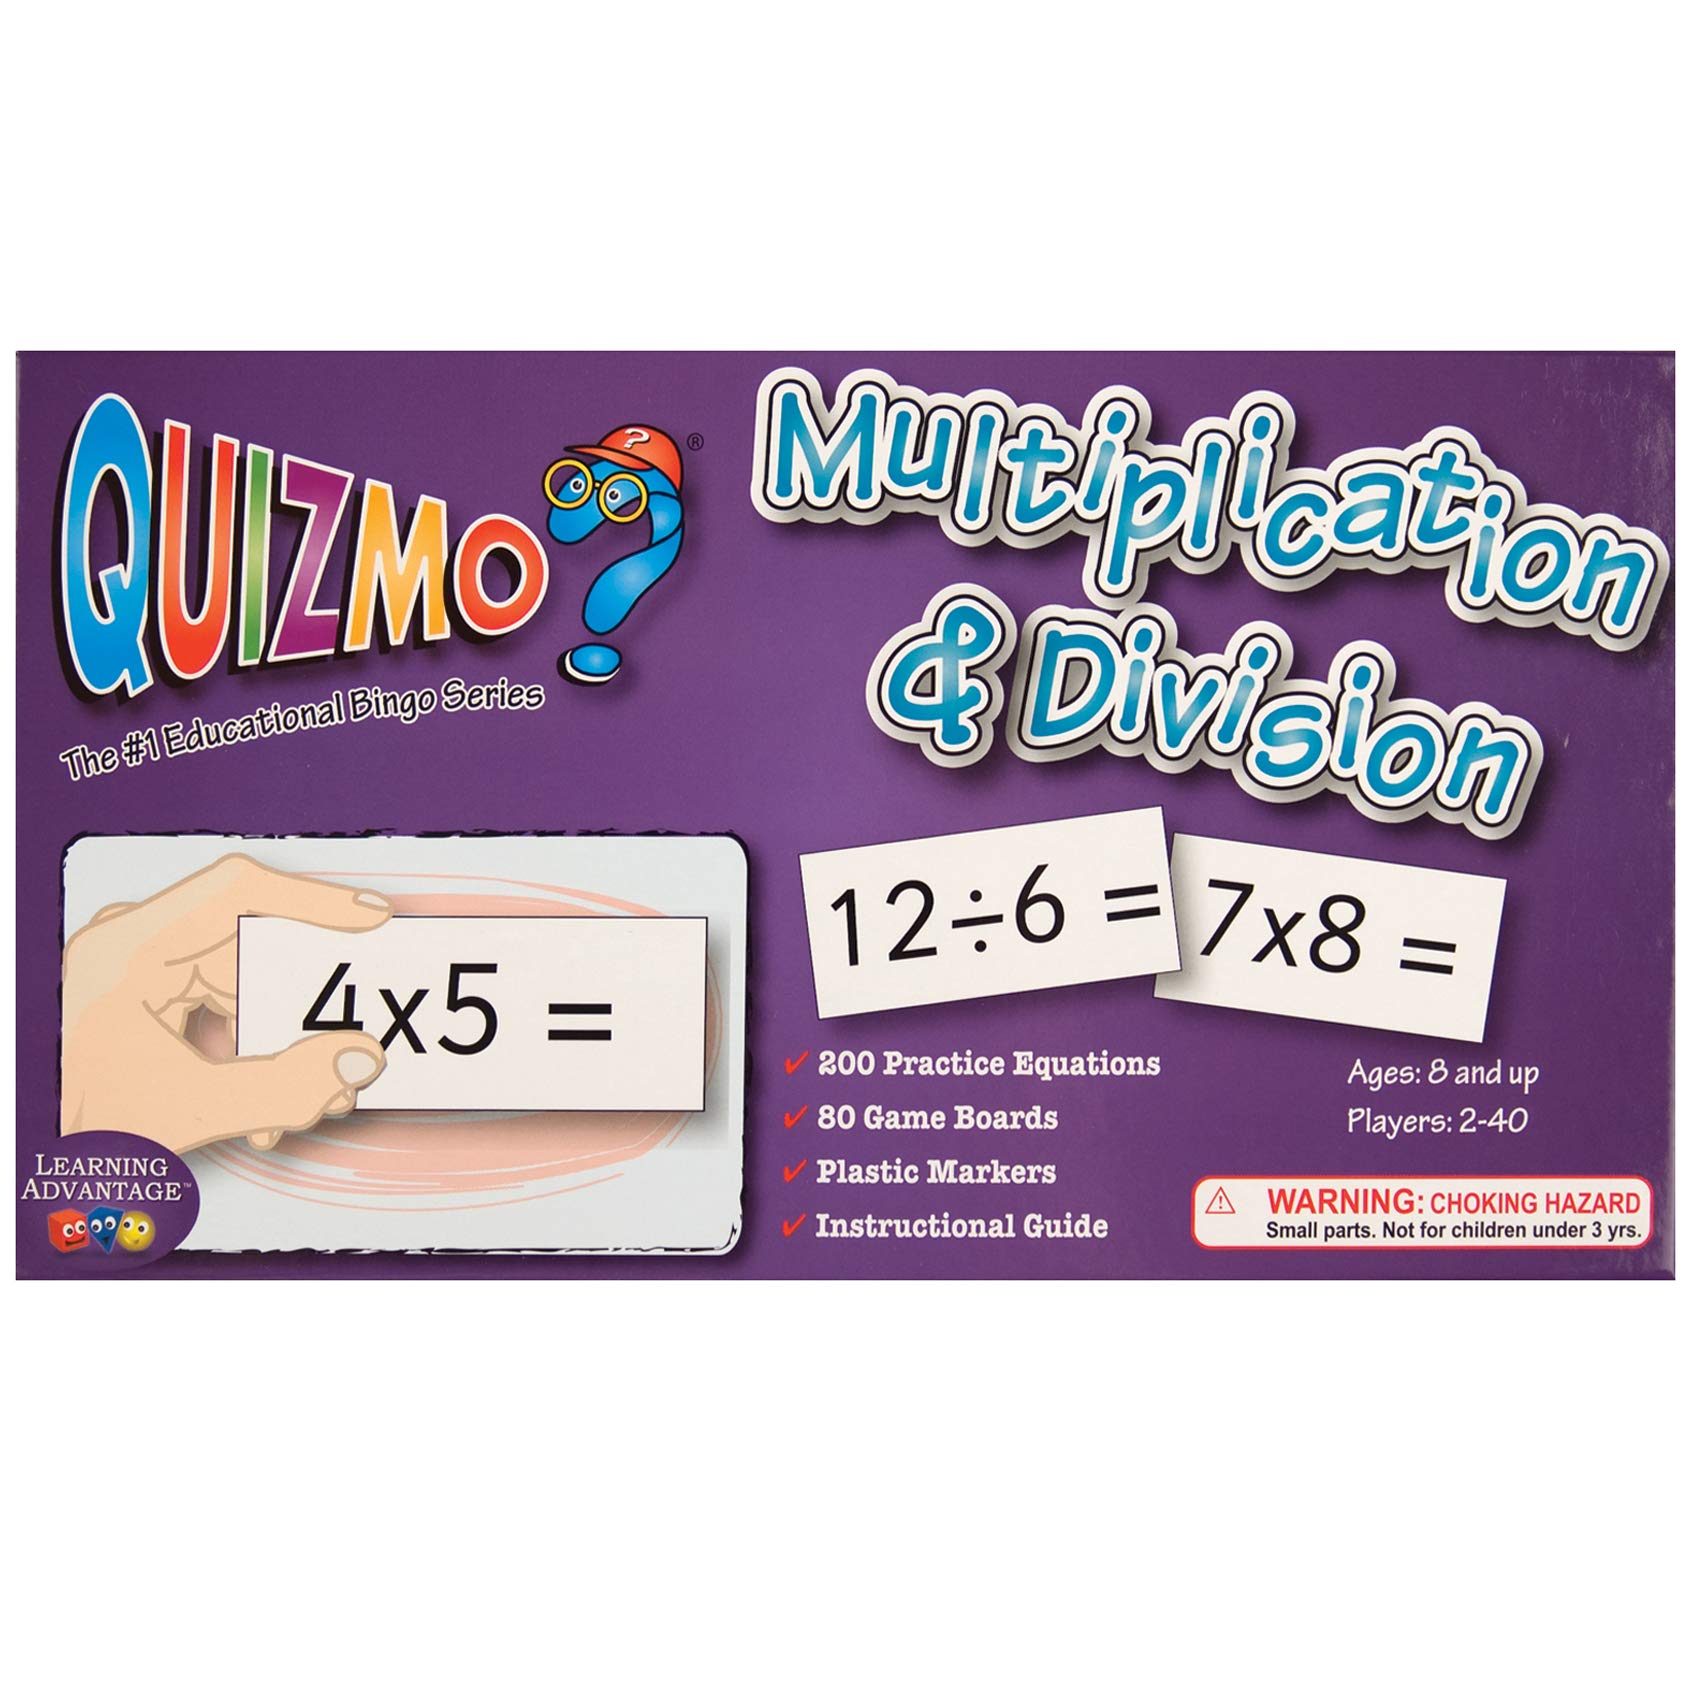 Learning Advantage QUIZMO Multiplication & Division - 40 Double-Sided Game Boards - Bingo-Style Math Game for Kids - Teach Multiplication and Division Through 9 (8243)